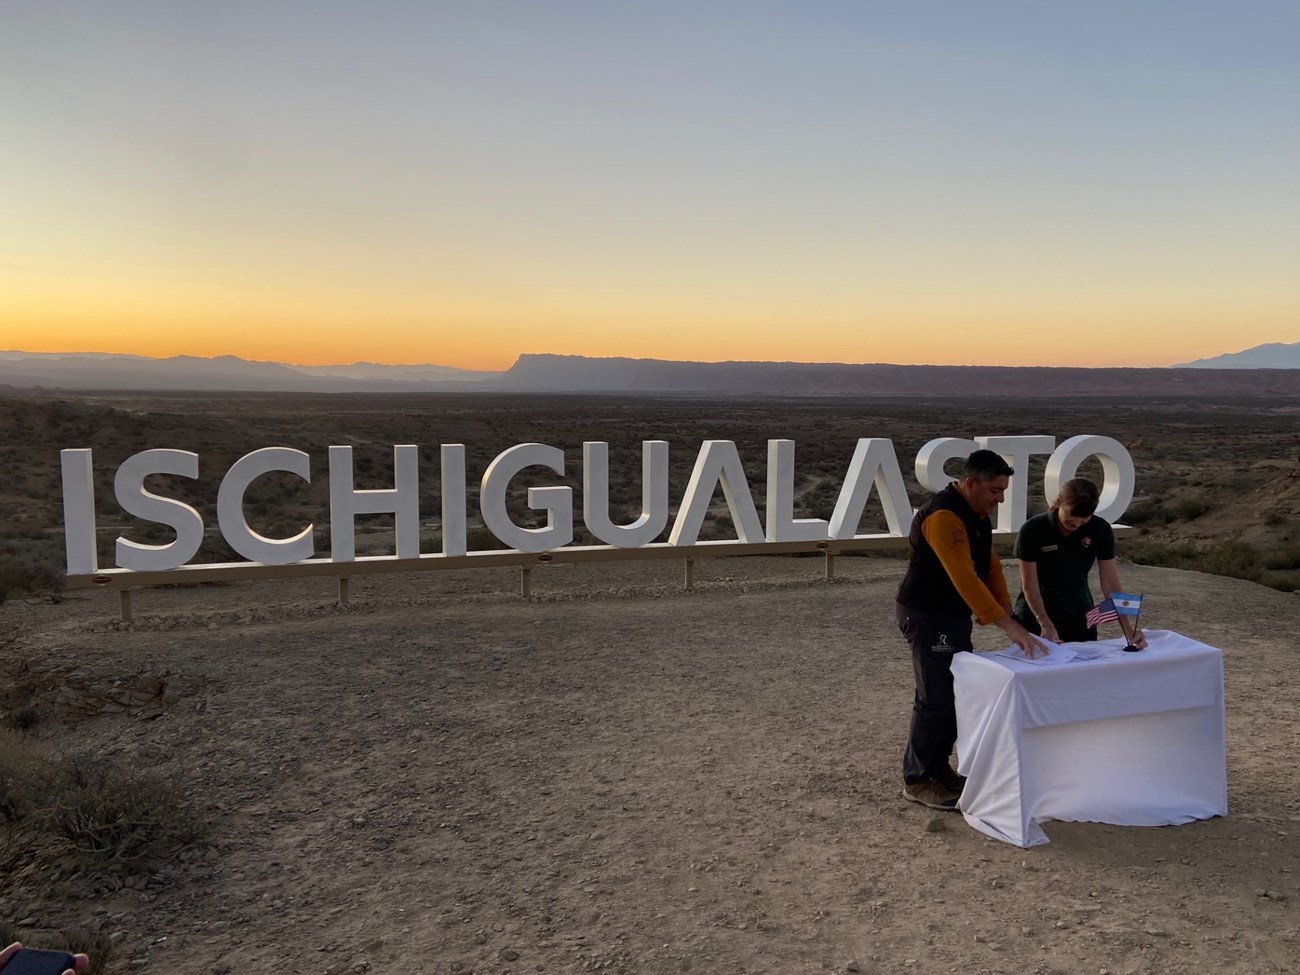 Photo two people at a small table in front of a sign for Ischigualasto.